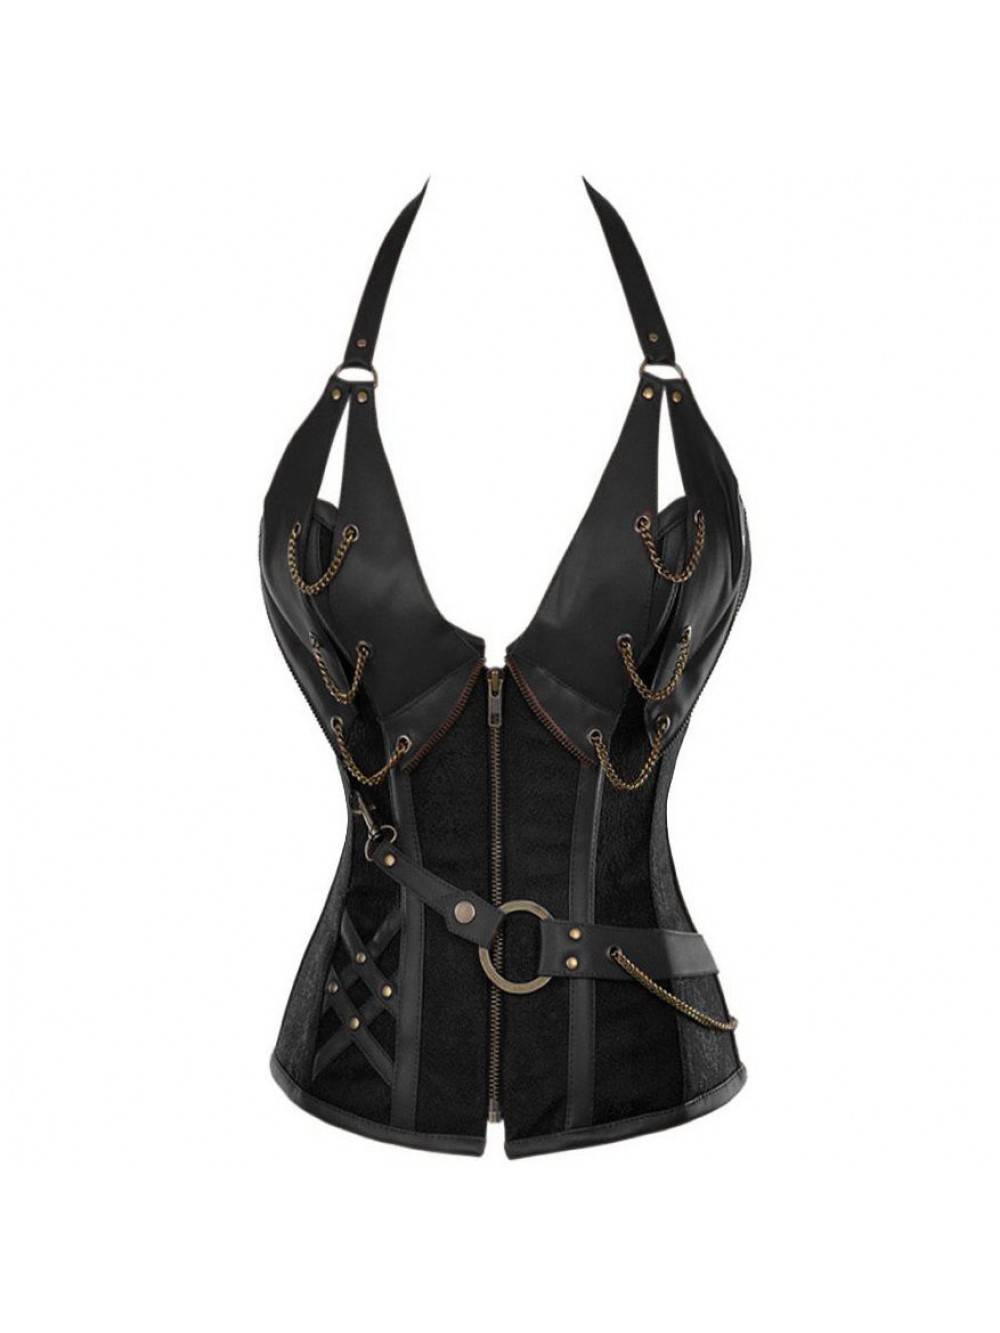 QUEEN CORSETS NEGRO LEATHER SIZE S 8440476247713